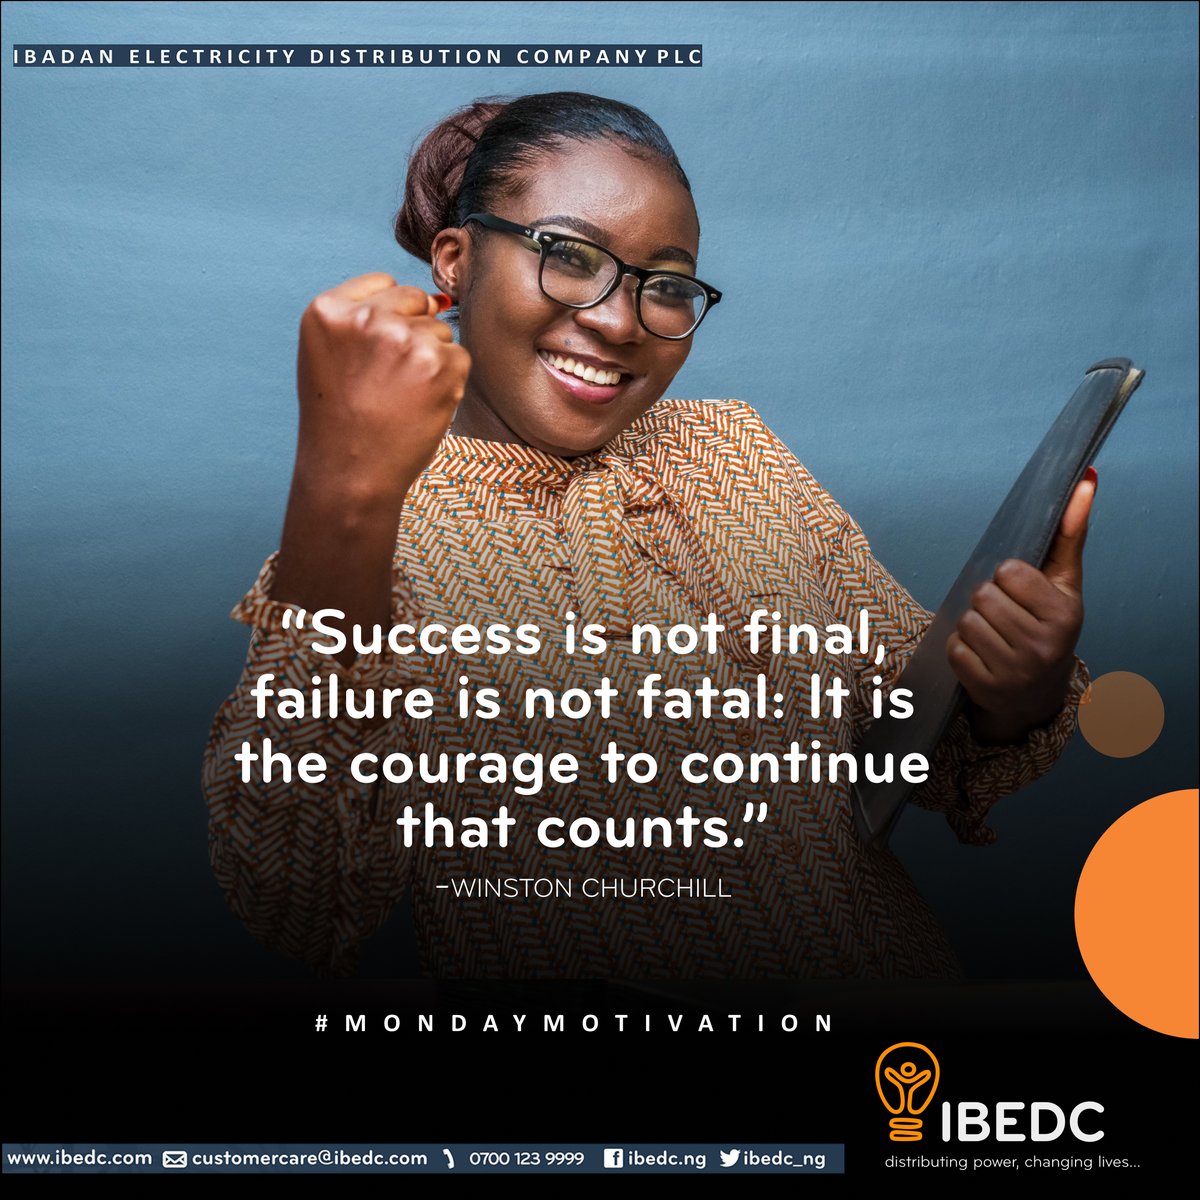 In the midst of trying times, we stay strong together. Happy new week. #ibedc #MondayMotivation #Staymotivated #distributingpower #changinglives